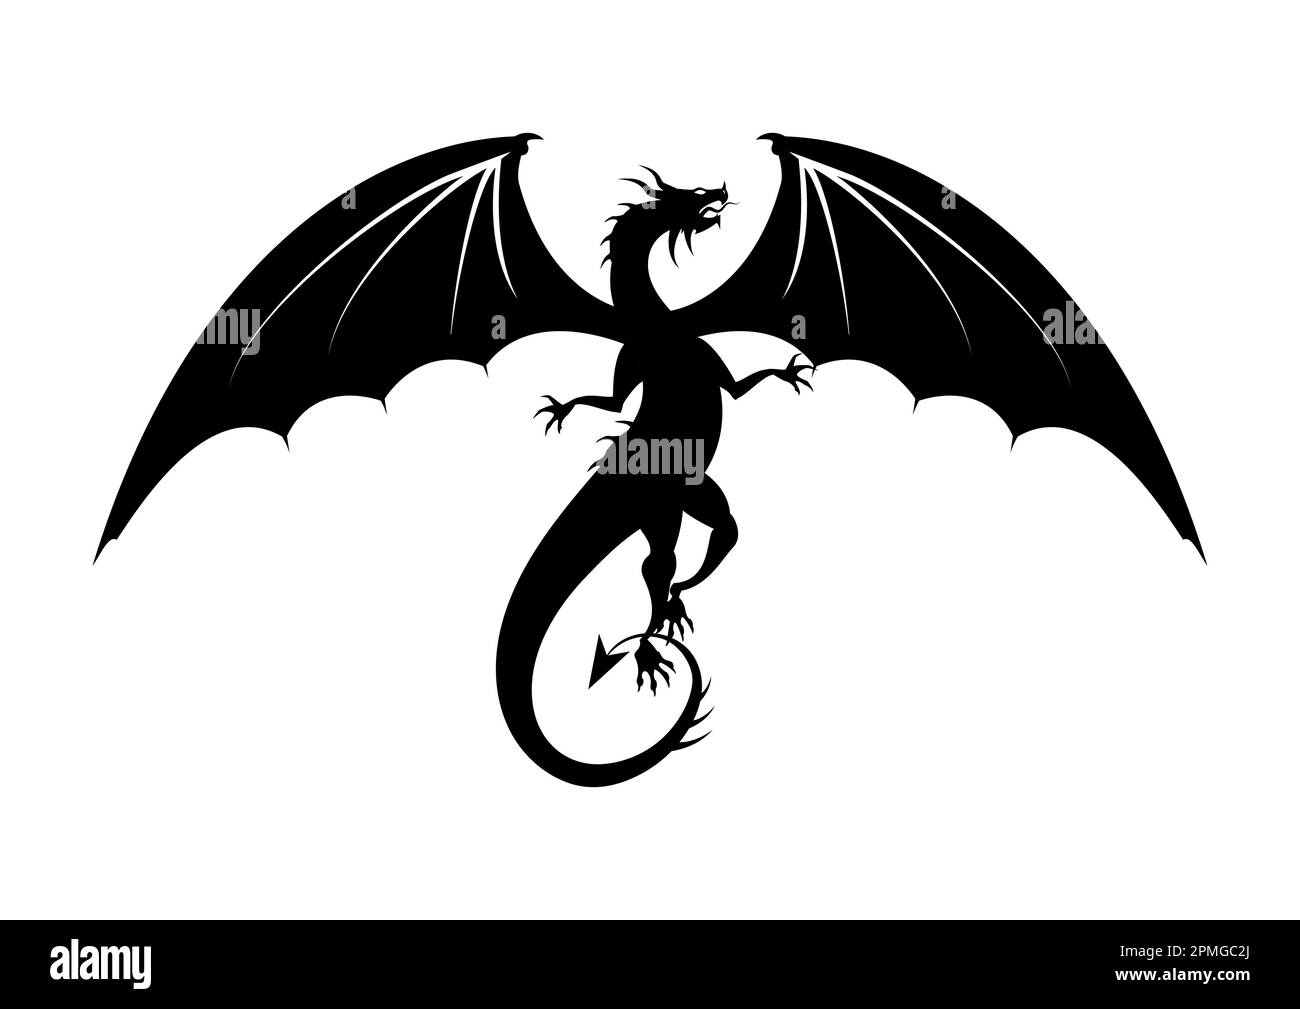 Black Dragon Clipart Vector Isolated On White Background. Black Dragon Tattoo Stock Vector